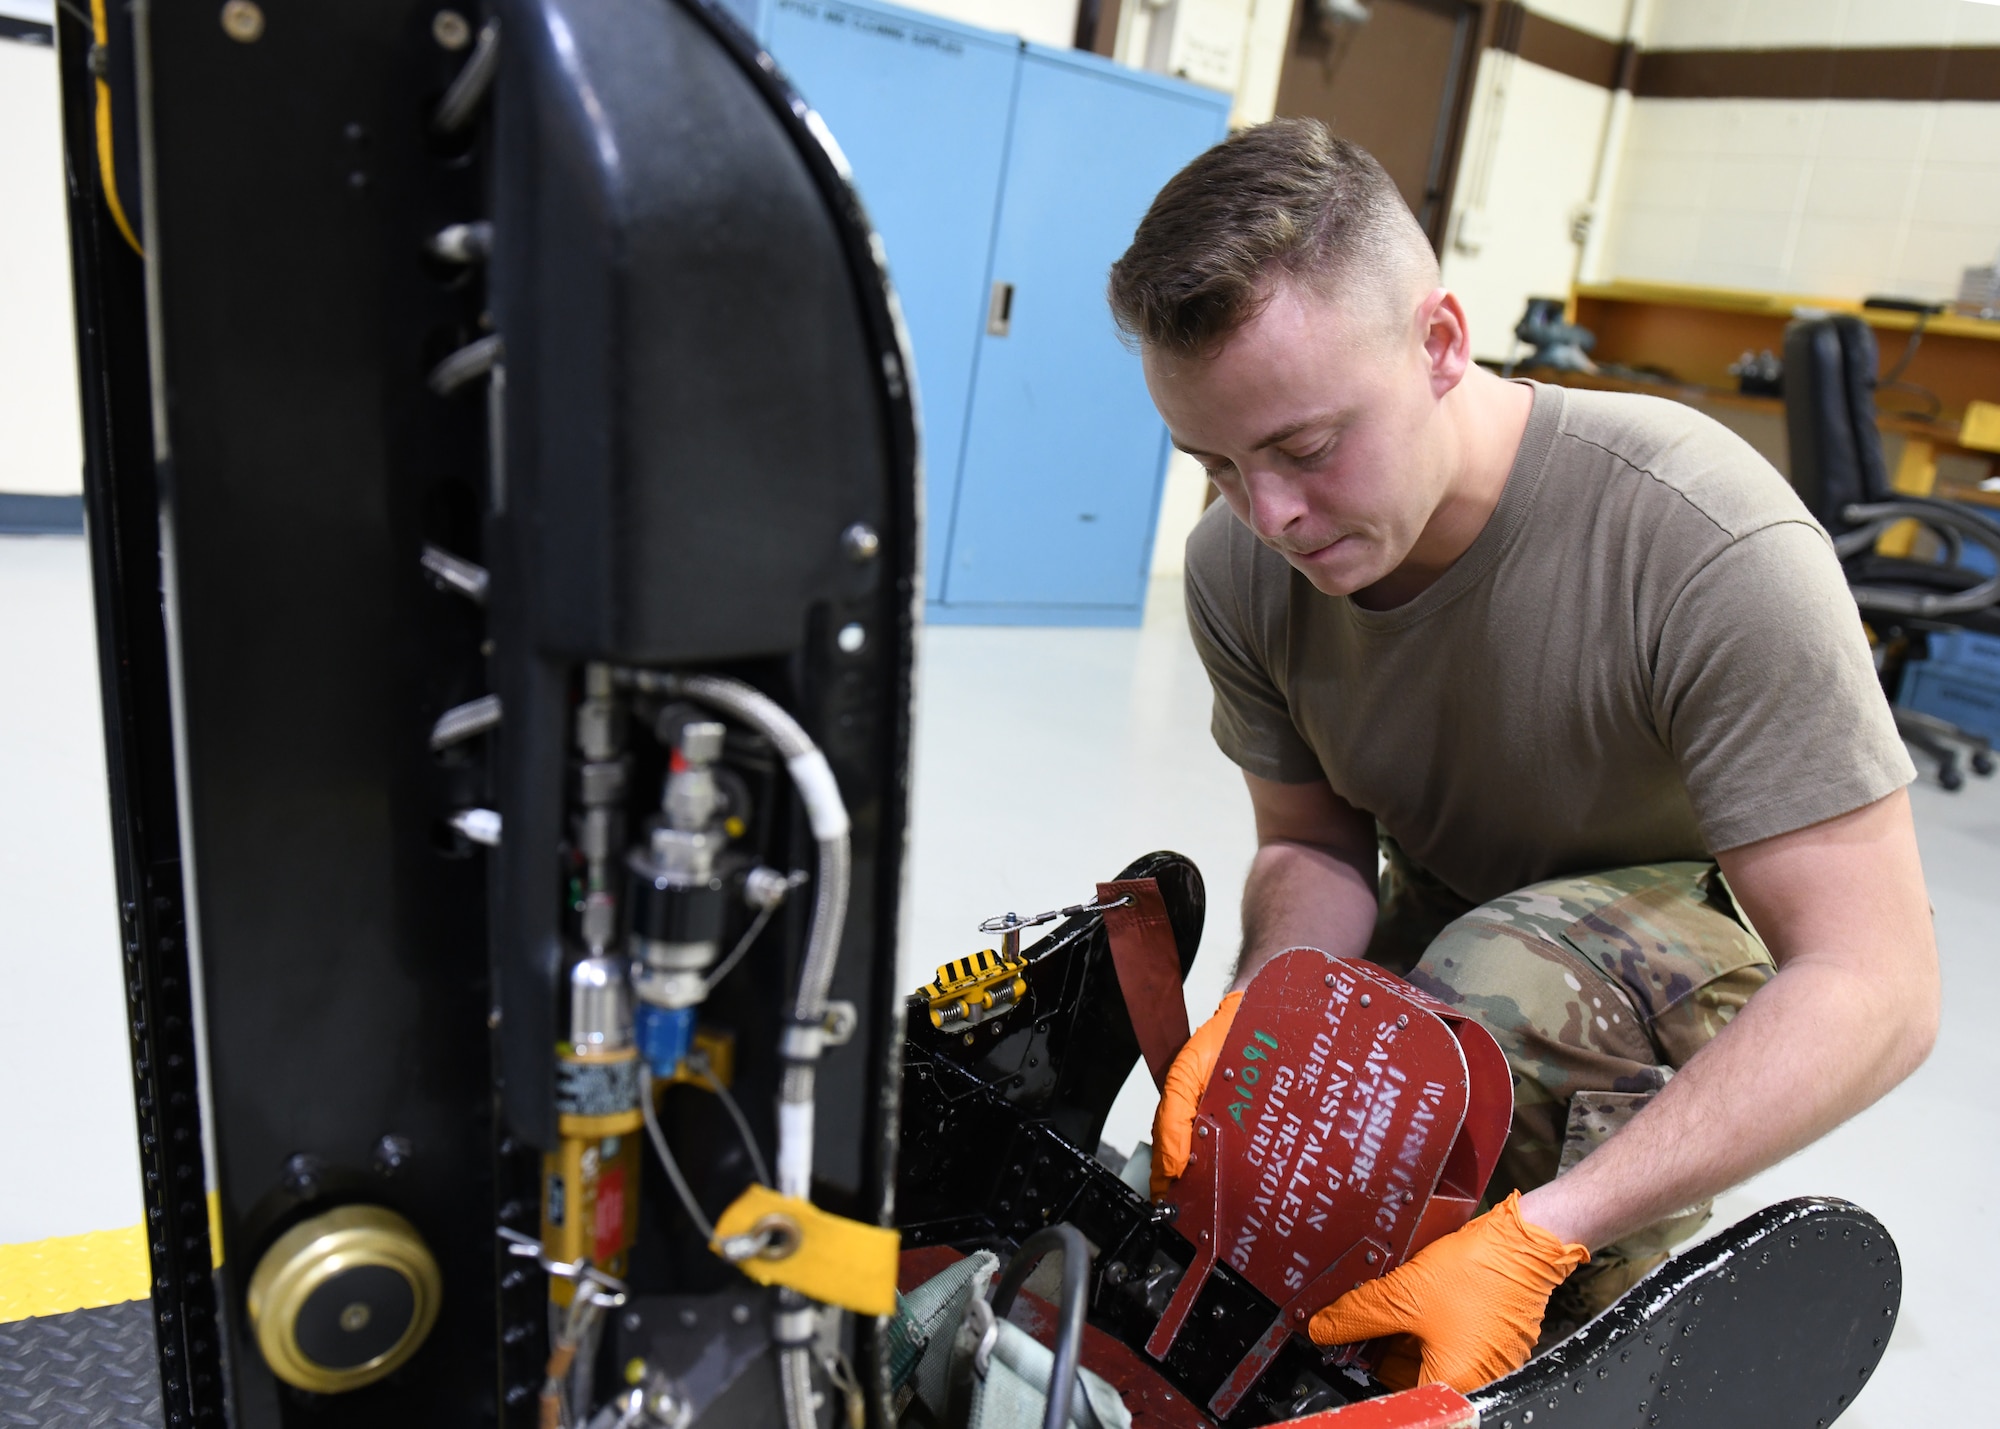 Airman 1st Class Robert Dumback, 9th Maintenance Squadron aircrew egress systems journeyman, installs a D-ring guard on a U-2 Dragon Lady egress seat Jan. 14, 2020 at Beale Air force Base, California. A D-ring is the component of an egress seat that a pilot pulls to eject. The purpose of a D-ring guard is to protect the D-ring and prevent the accidental activation of an egress seat. (U.S. Air Force photo by Airman 1st Class Luis A. Ruiz-Vazquez)